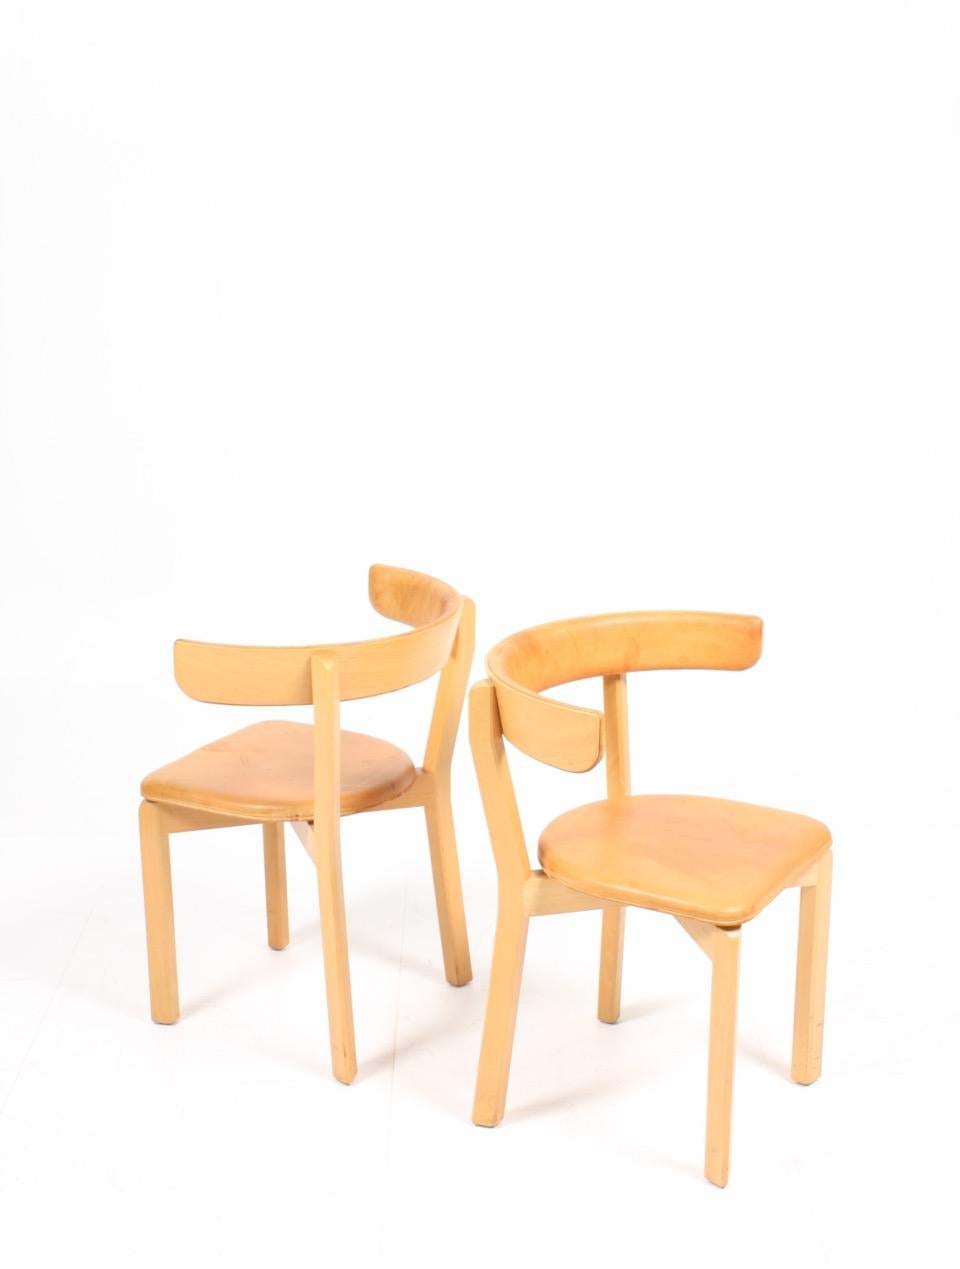 Set of eight side chairs covered in patinated leather on a solid beech frame. Designed by MAA. Jørgen Gammelgaard - Made by Sorø Møbelfabrik Denmark in the 1970s. Good original condition.